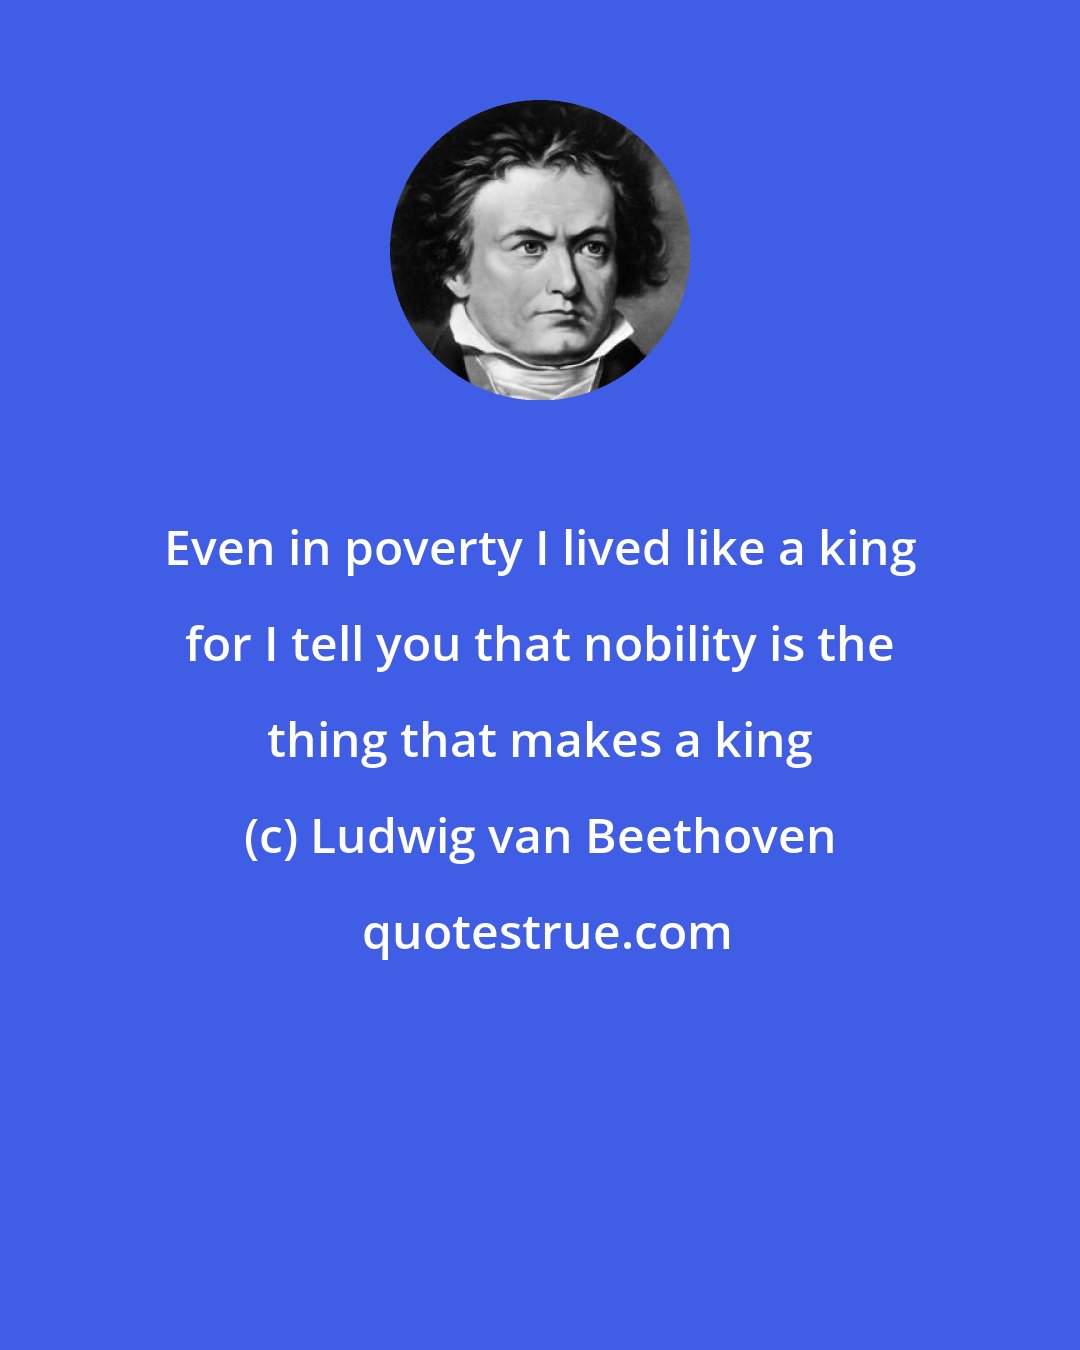 Ludwig van Beethoven: Even in poverty I lived like a king for I tell you that nobility is the thing that makes a king